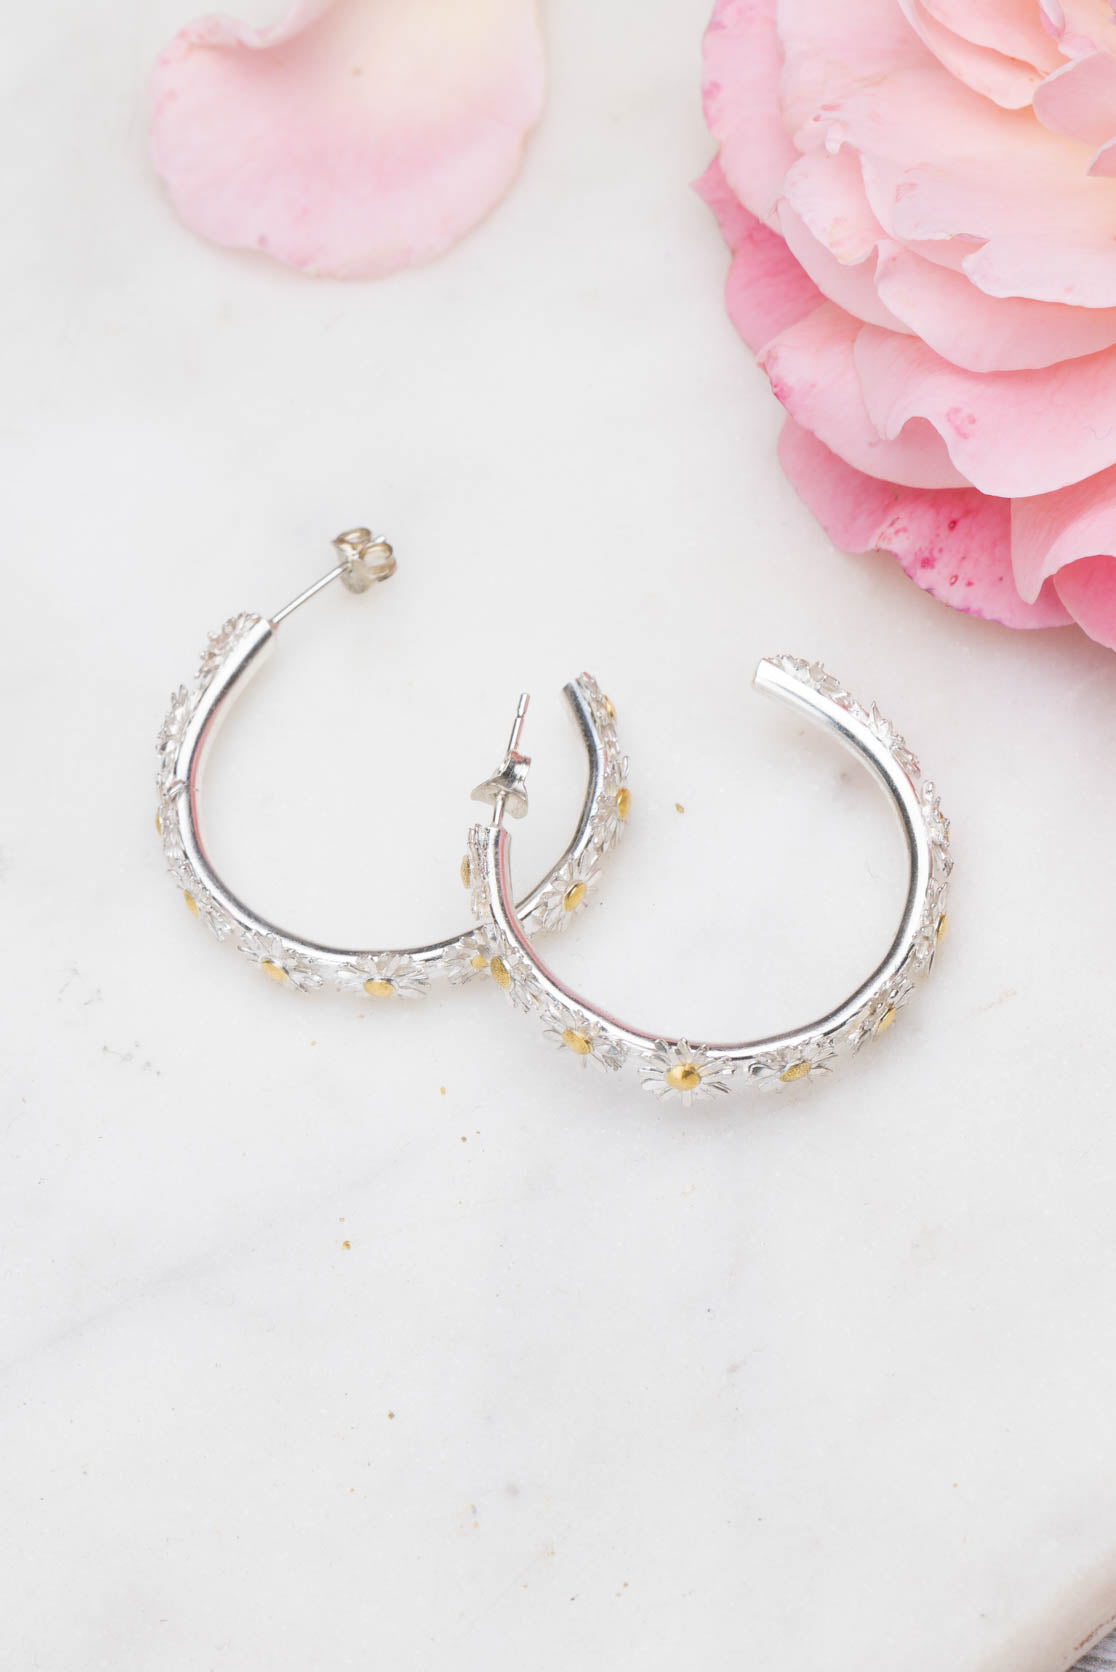 Daisy Statement Hoop Earrings In Sterling Silver With 9ct Gold